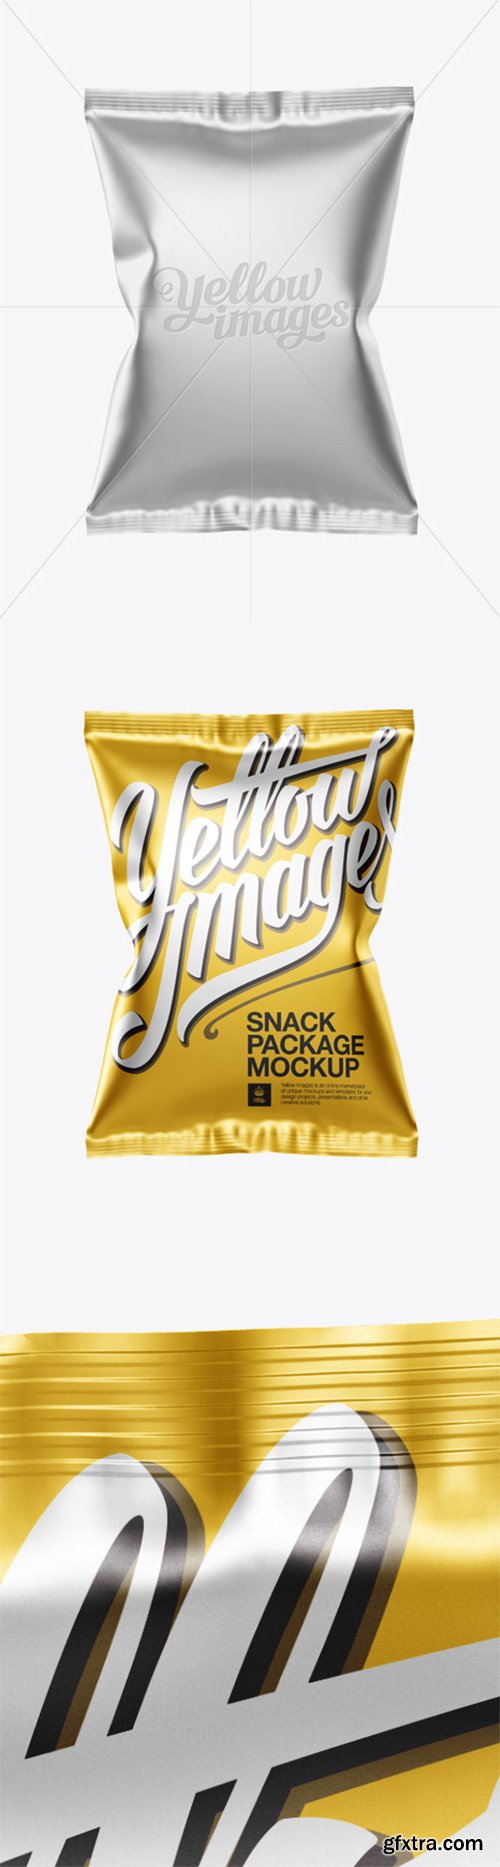 Matte Metallic Snack Package Mockup - Front View 12709